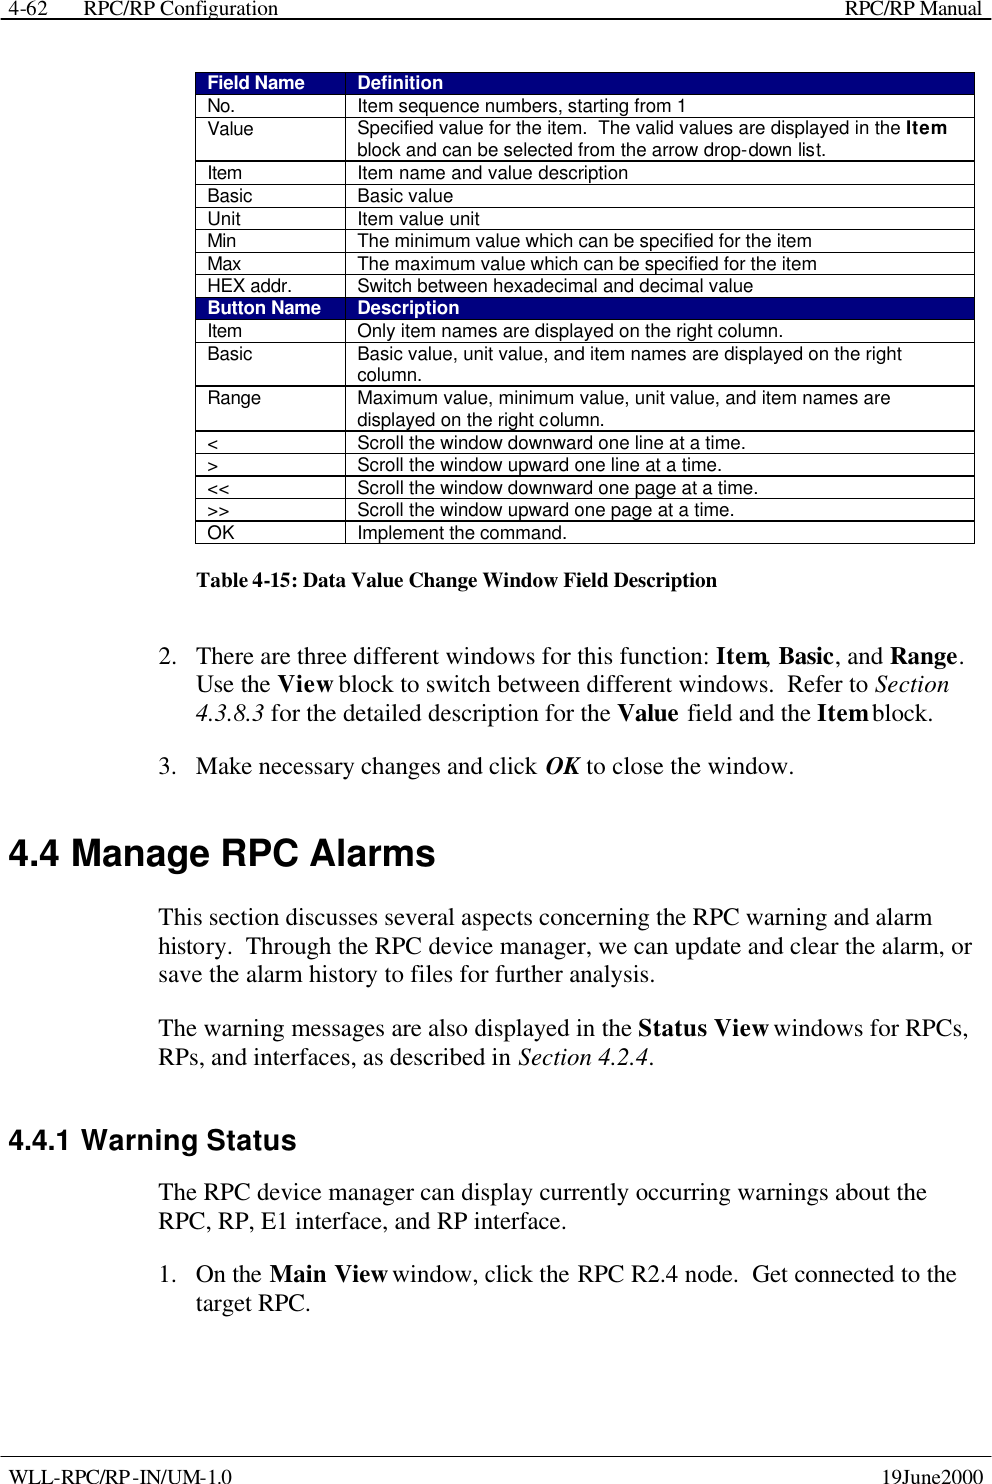  RPC/RP Configuration    RPC/RP Manual   WLL-RPC/RP-IN/UM-1.0    19June2000 4-62Field Name Definition No. Item sequence numbers, starting from 1 Value Specified value for the item.  The valid values are displayed in the Item block and can be selected from the arrow drop-down list. Item Item name and value description Basic Basic value Unit Item value unit Min The minimum value which can be specified for the item Max The maximum value which can be specified for the item HEX addr. Switch between hexadecimal and decimal value Button Name Description Item Only item names are displayed on the right column. Basic Basic value, unit value, and item names are displayed on the right column. Range Maximum value, minimum value, unit value, and item names are displayed on the right column. &lt; Scroll the window downward one line at a time. &gt; Scroll the window upward one line at a time. &lt;&lt; Scroll the window downward one page at a time. &gt;&gt; Scroll the window upward one page at a time. OK Implement the command. Table 4-15: Data Value Change Window Field Description 2.  There are three different windows for this function: Item, Basic, and Range.  Use the View block to switch between different windows.  Refer to Section 4.3.8.3 for the detailed description for the Value field and the Item block. 3.  Make necessary changes and click OK to close the window. 4.4 Manage RPC Alarms This section discusses several aspects concerning the RPC warning and alarm history.  Through the RPC device manager, we can update and clear the alarm, or save the alarm history to files for further analysis.   The warning messages are also displayed in the Status View windows for RPCs, RPs, and interfaces, as described in Section 4.2.4. 4.4.1 Warning Status The RPC device manager can display currently occurring warnings about the RPC, RP, E1 interface, and RP interface.   1.  On the Main View window, click the RPC R2.4 node.  Get connected to the target RPC.   